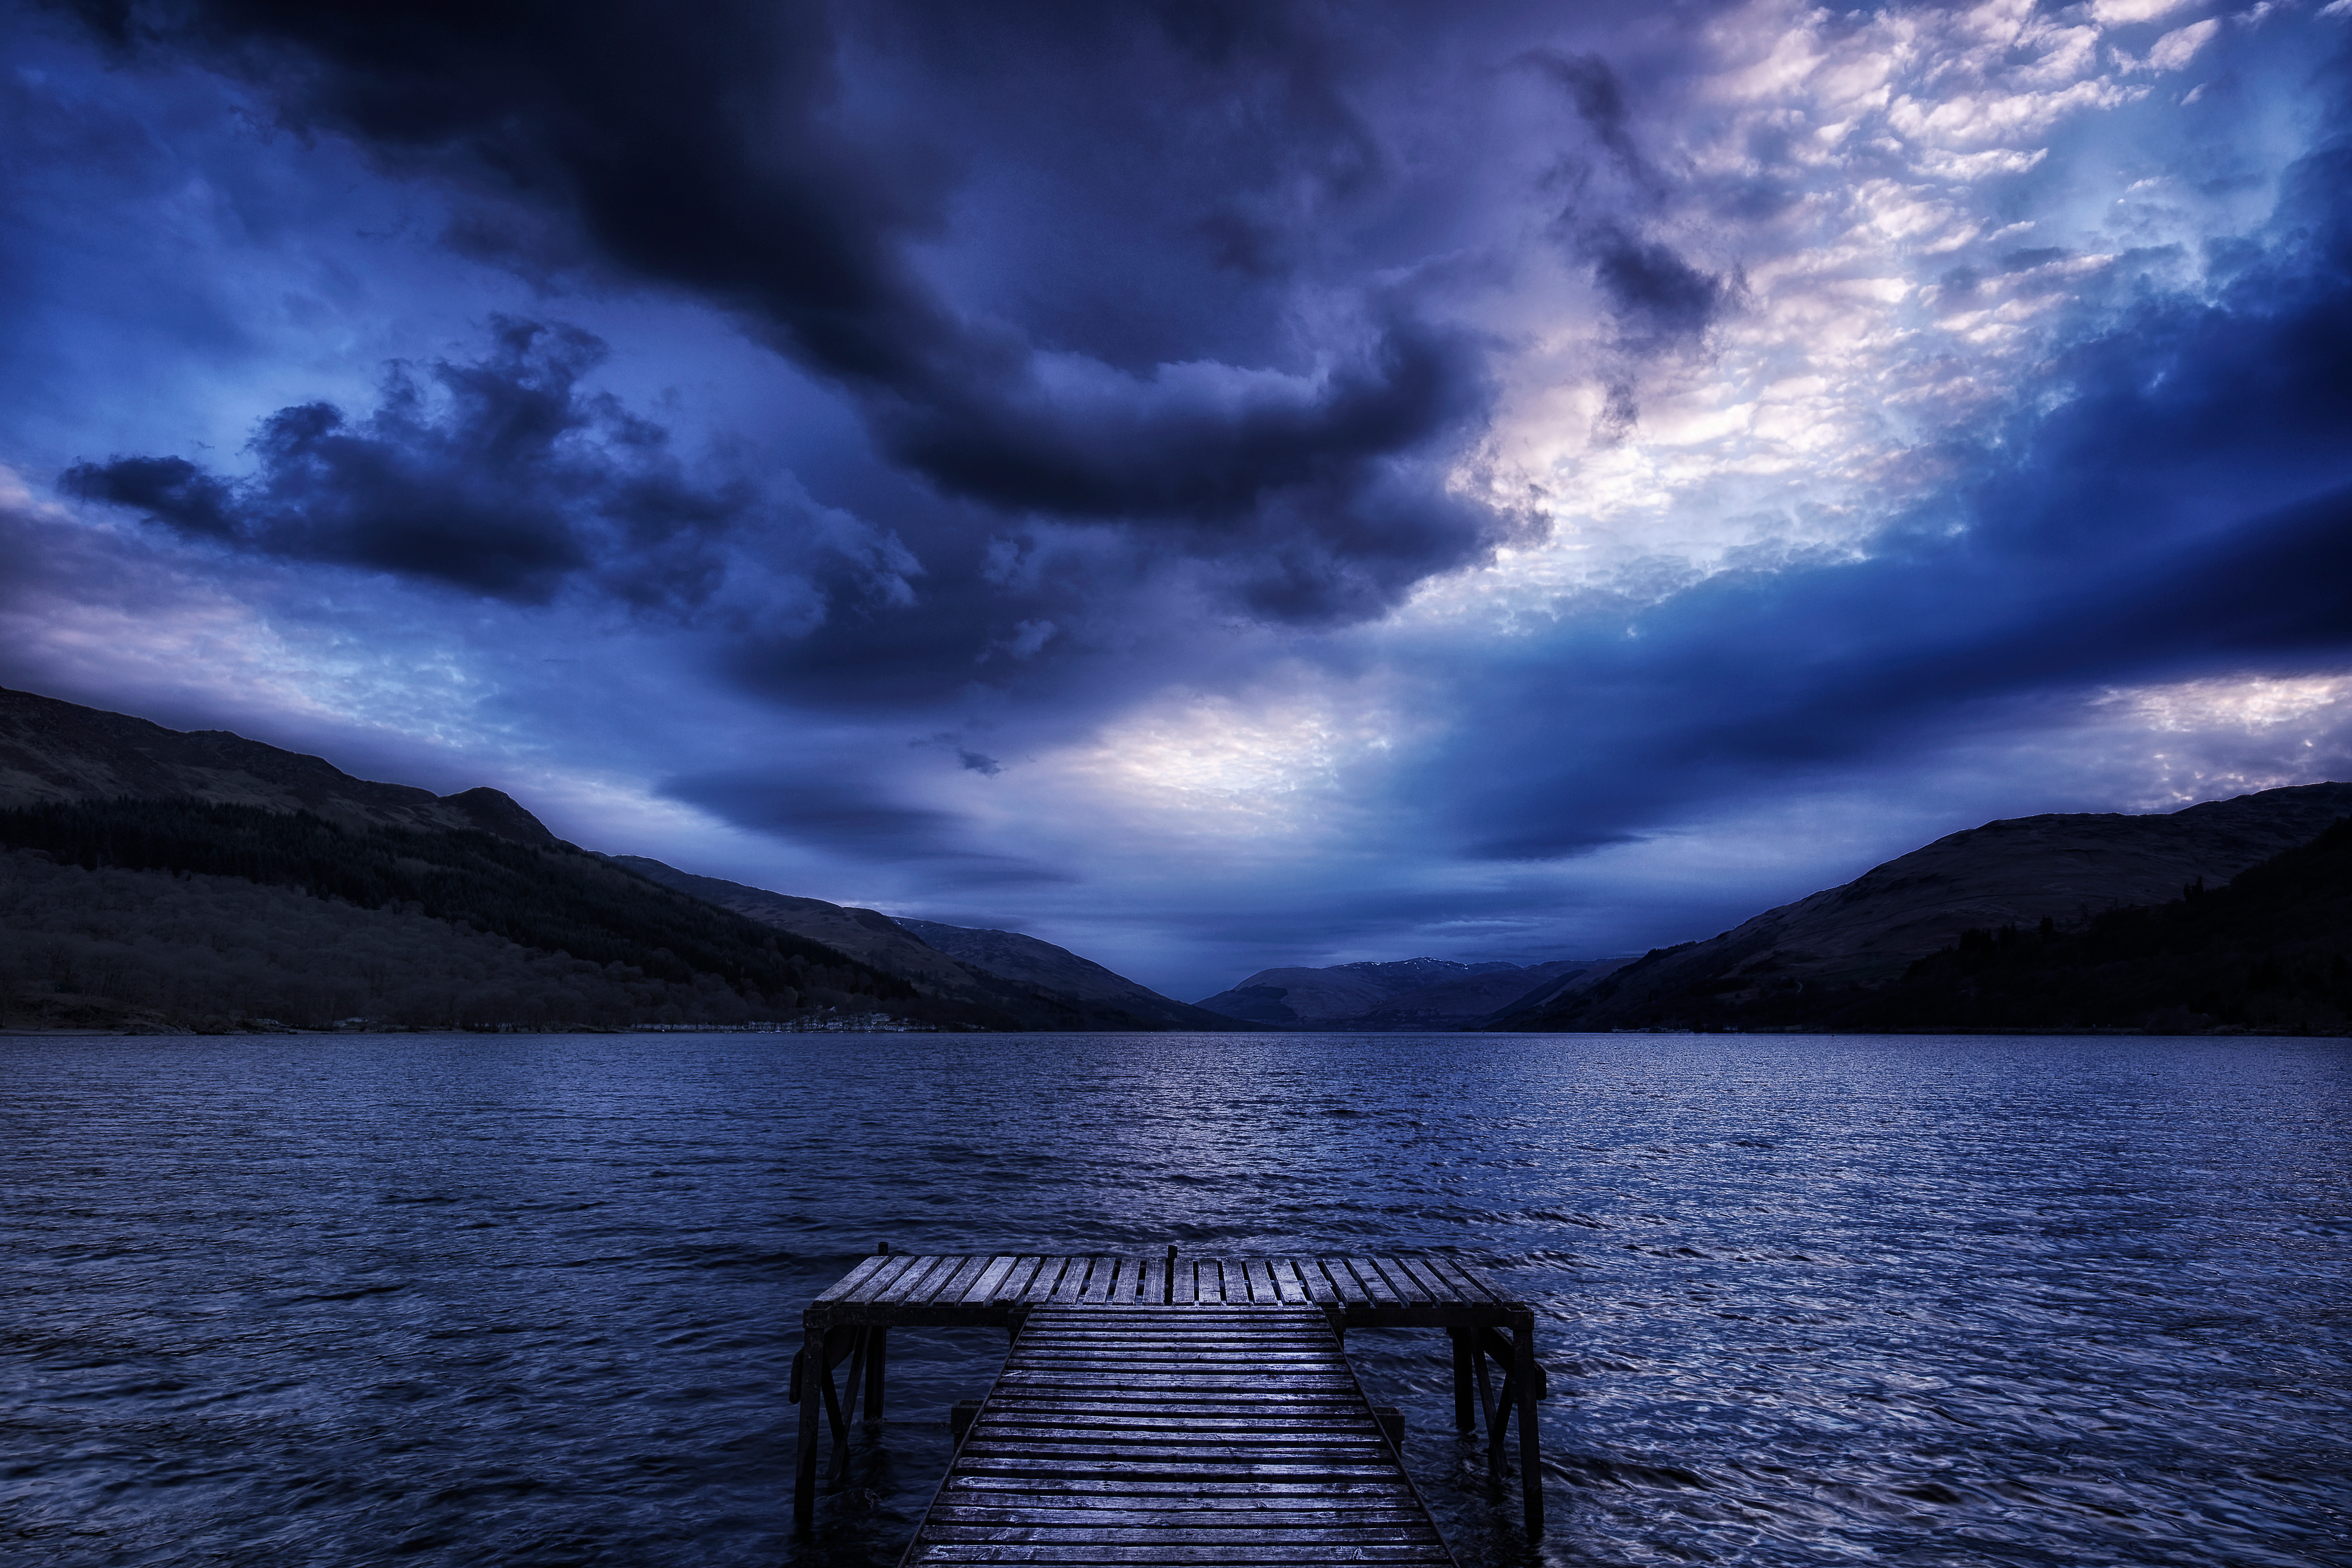 Lake Pier on a Cloudy Afternoon by John McSporran